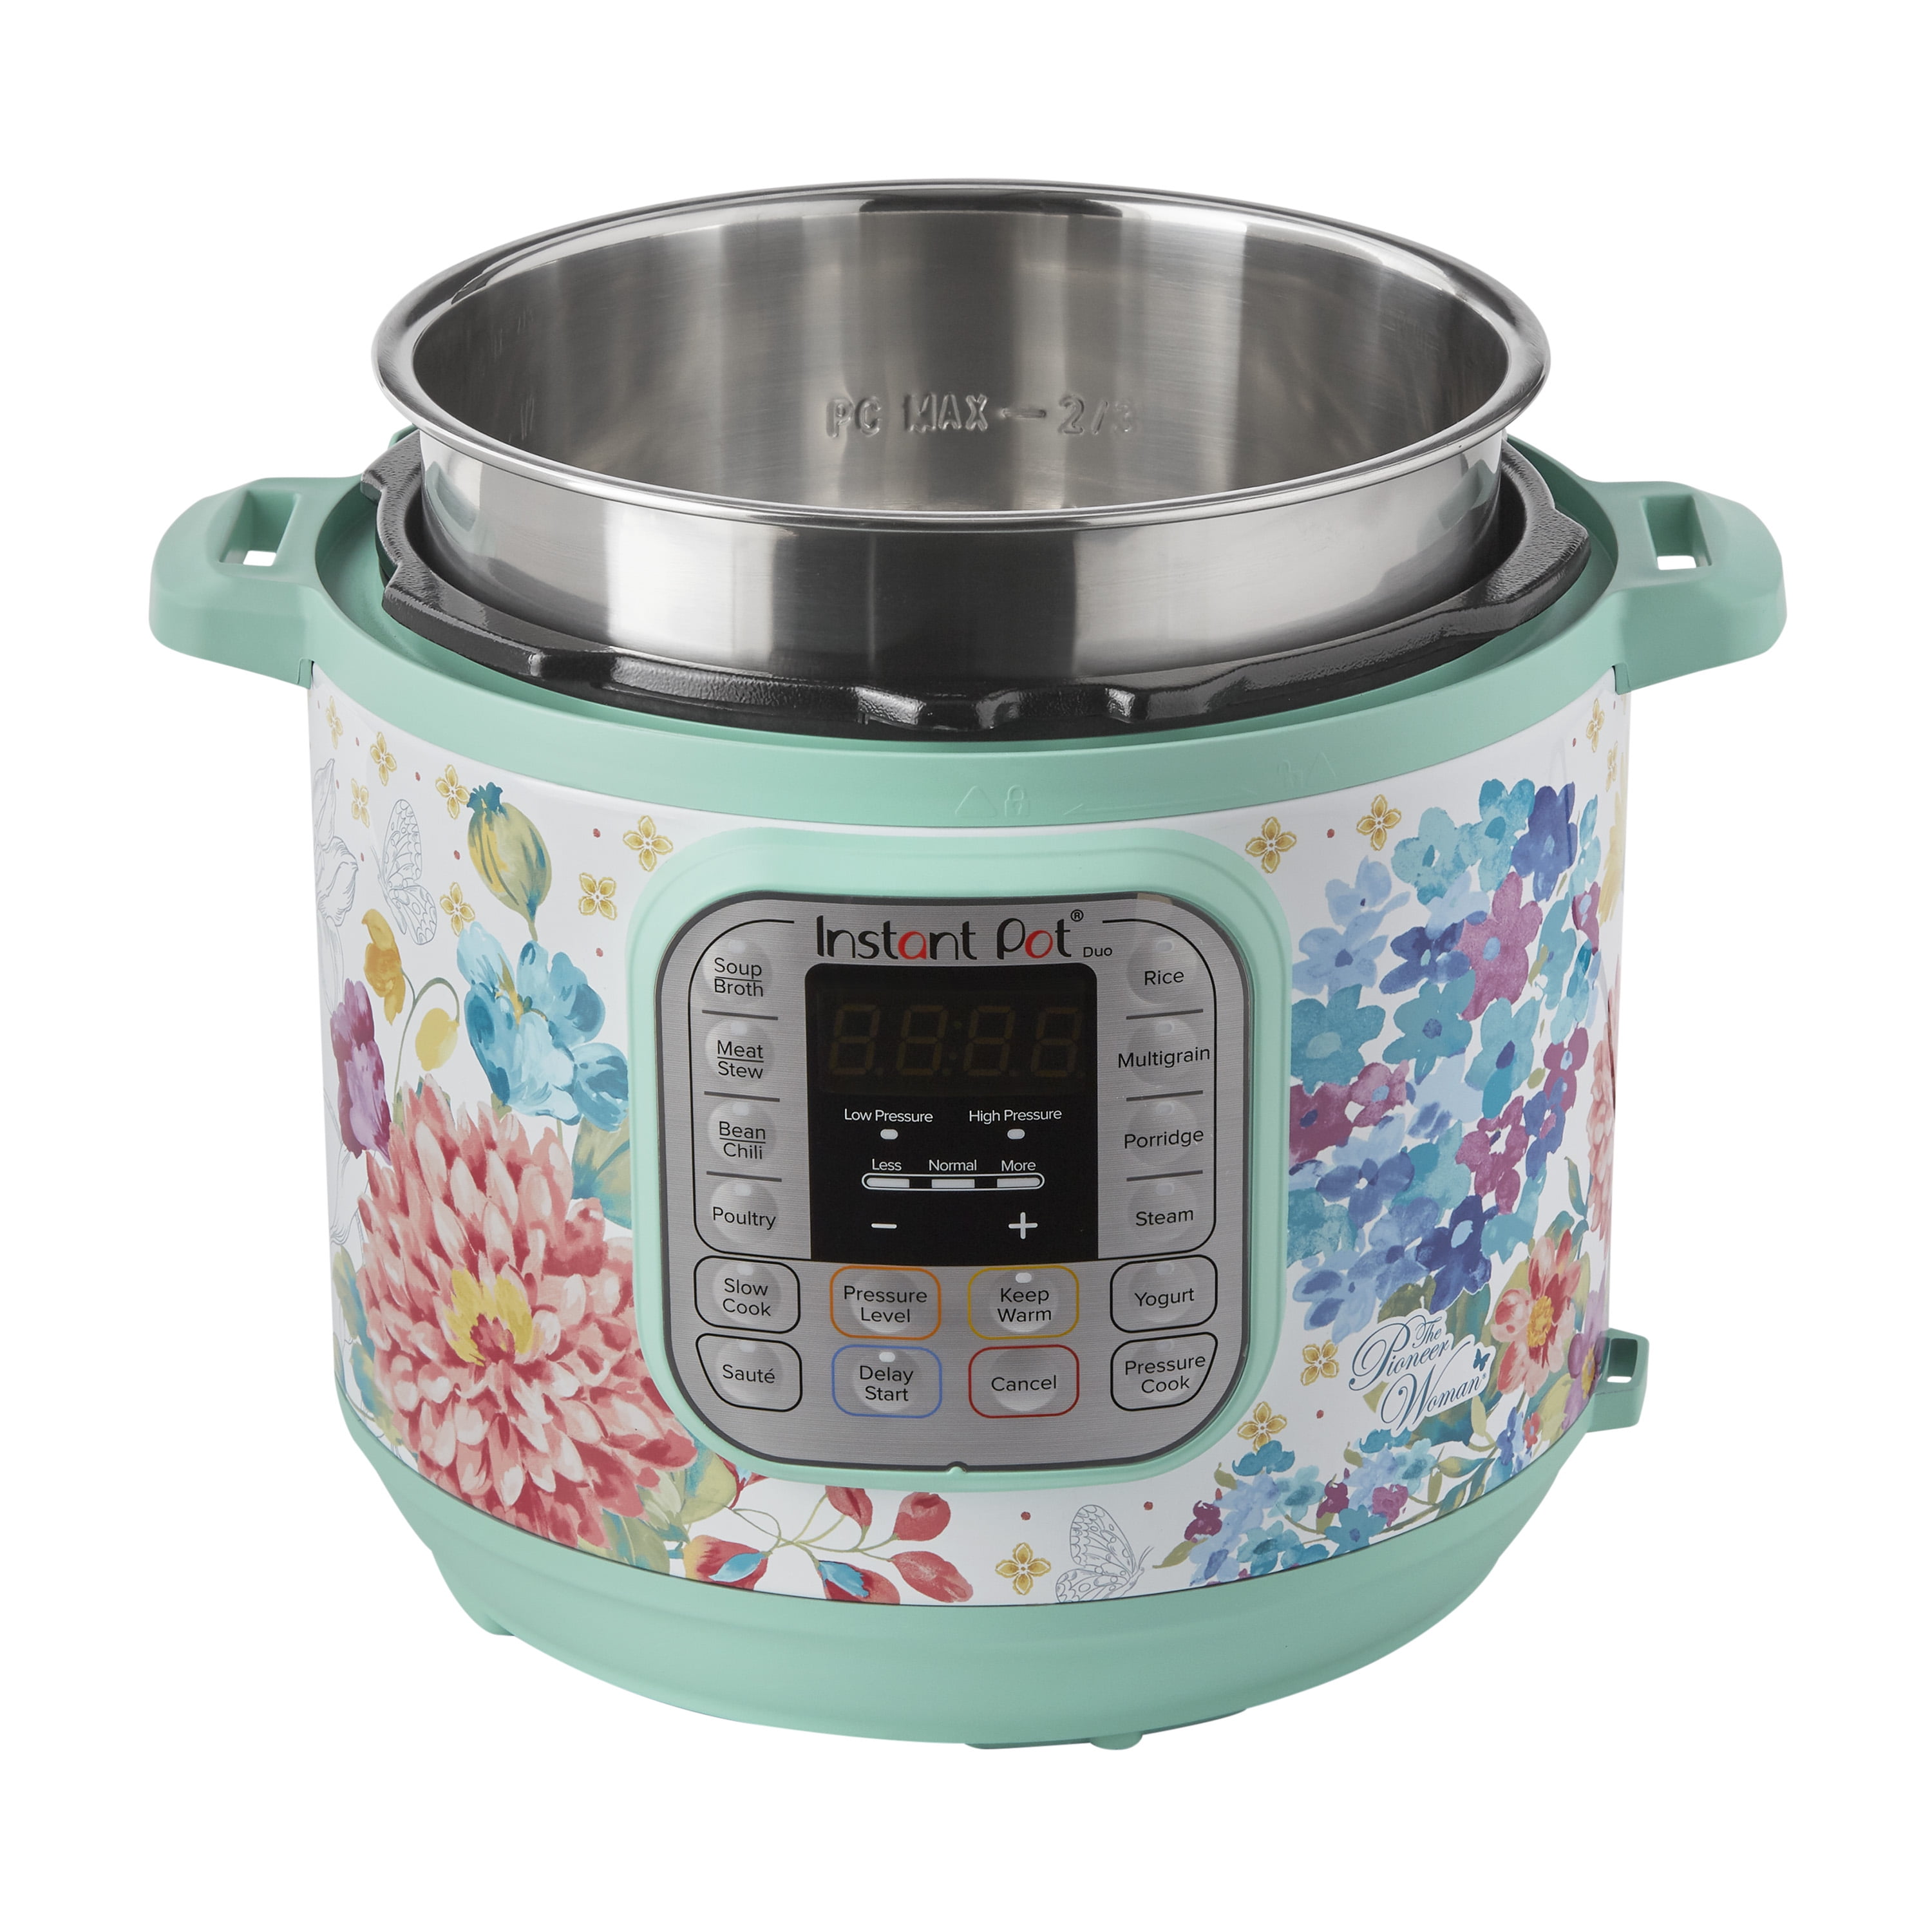 Instant Pot deal: Get a beautiful floral multi-cooker for just $55